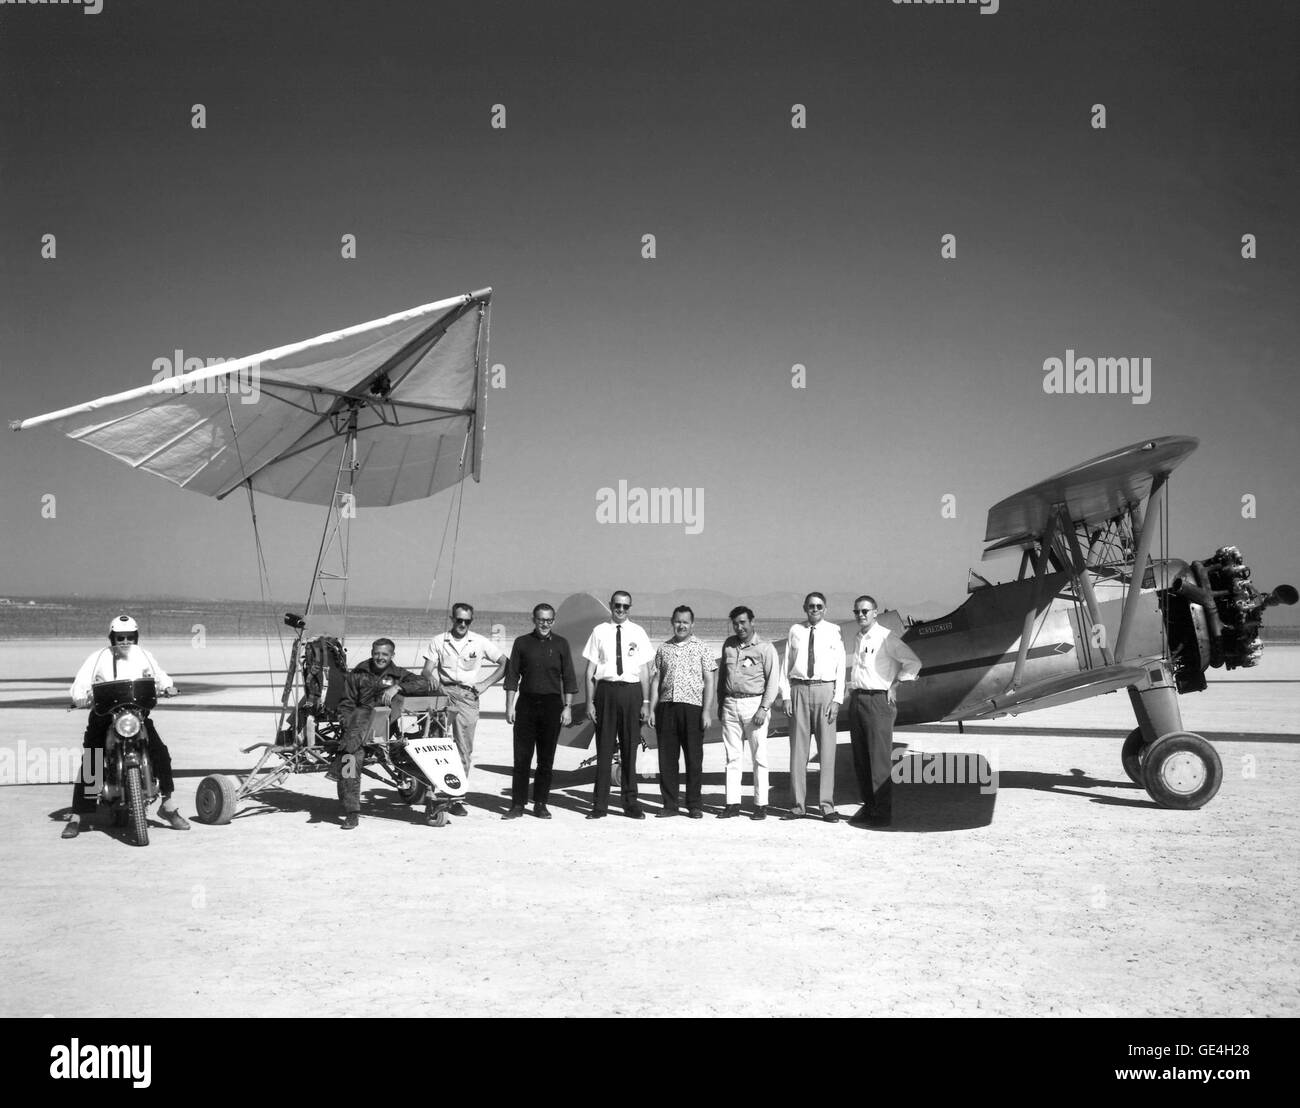 (August 24, 1962) With the Paresev 1-A and the 450-hp Stearman Sport Biplane as a backdrop the pilot and crew pose for this picture in 1962. Starting at left: On the motorcycle is Walter Whiteside, in the Paresev 1-A is test pilot Milton Thompson, Frank Fedor, Richard Klein, Victor Horton, Tom Kelly, Jr., Fred Harris, owner of the Stearman, John Orahood, and Gary Layton.  Image # : E-8713 Stock Photo